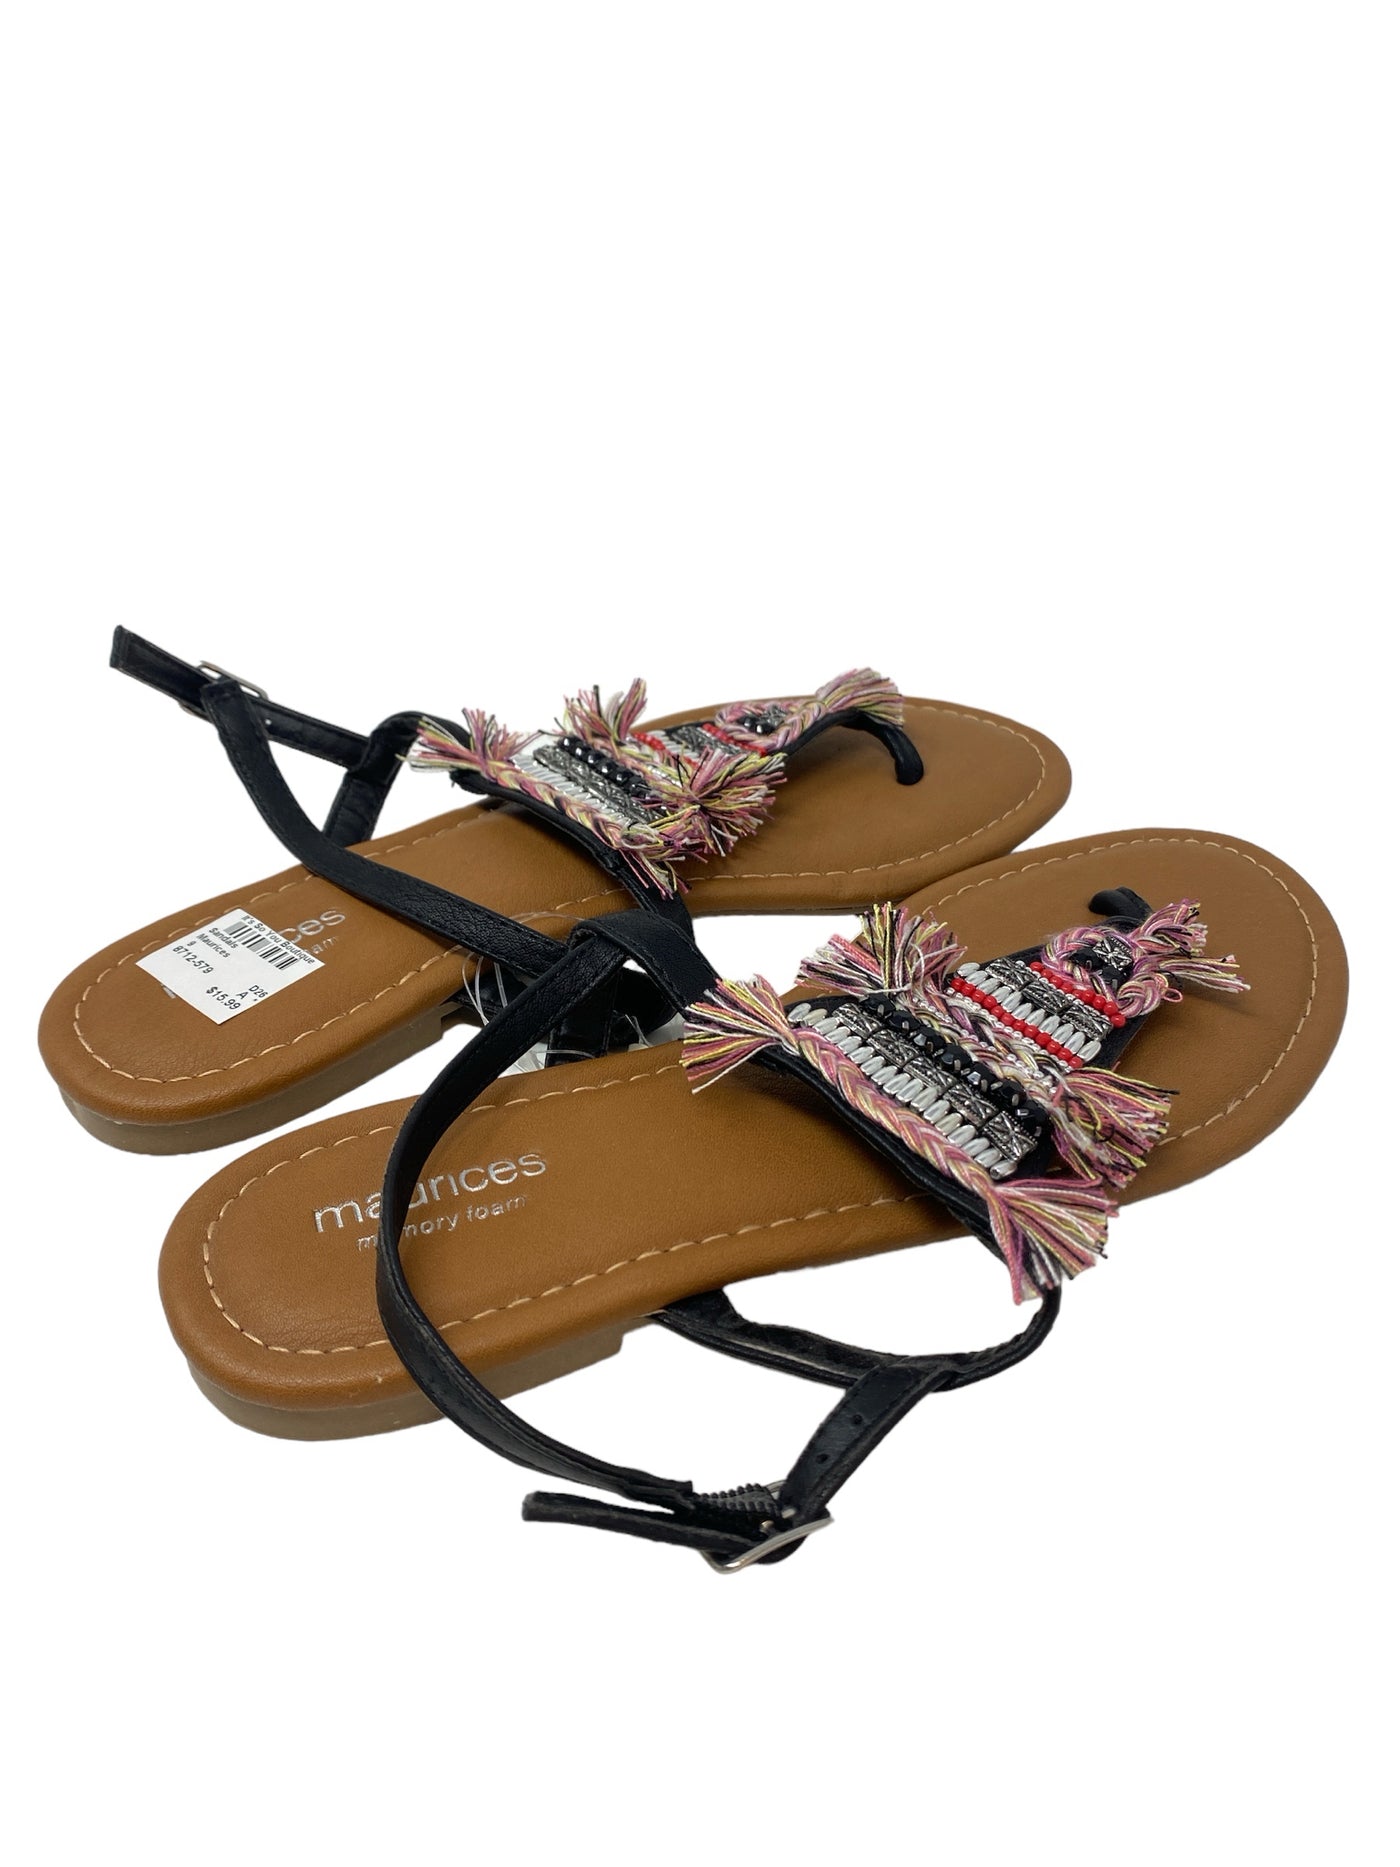 Maurices Women Size 9 Tan Multi Sandals